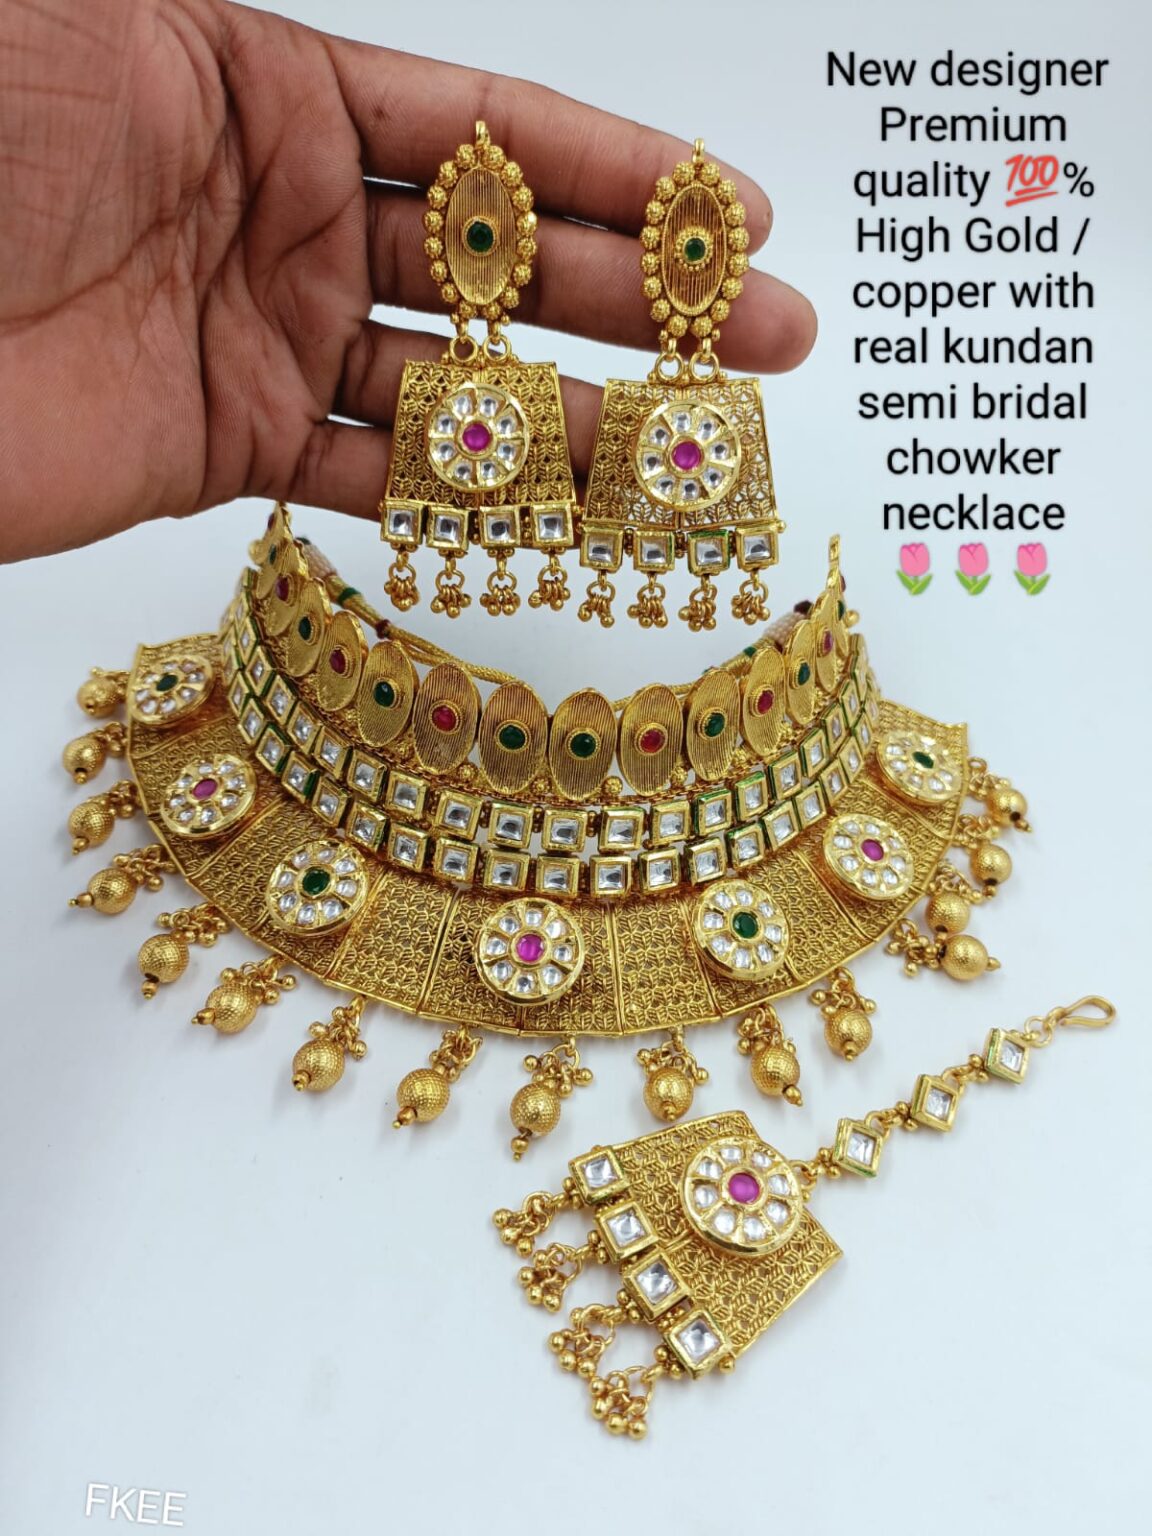 Jewelry Set For Wedding: How to Choose Wedding Jewelry Sets